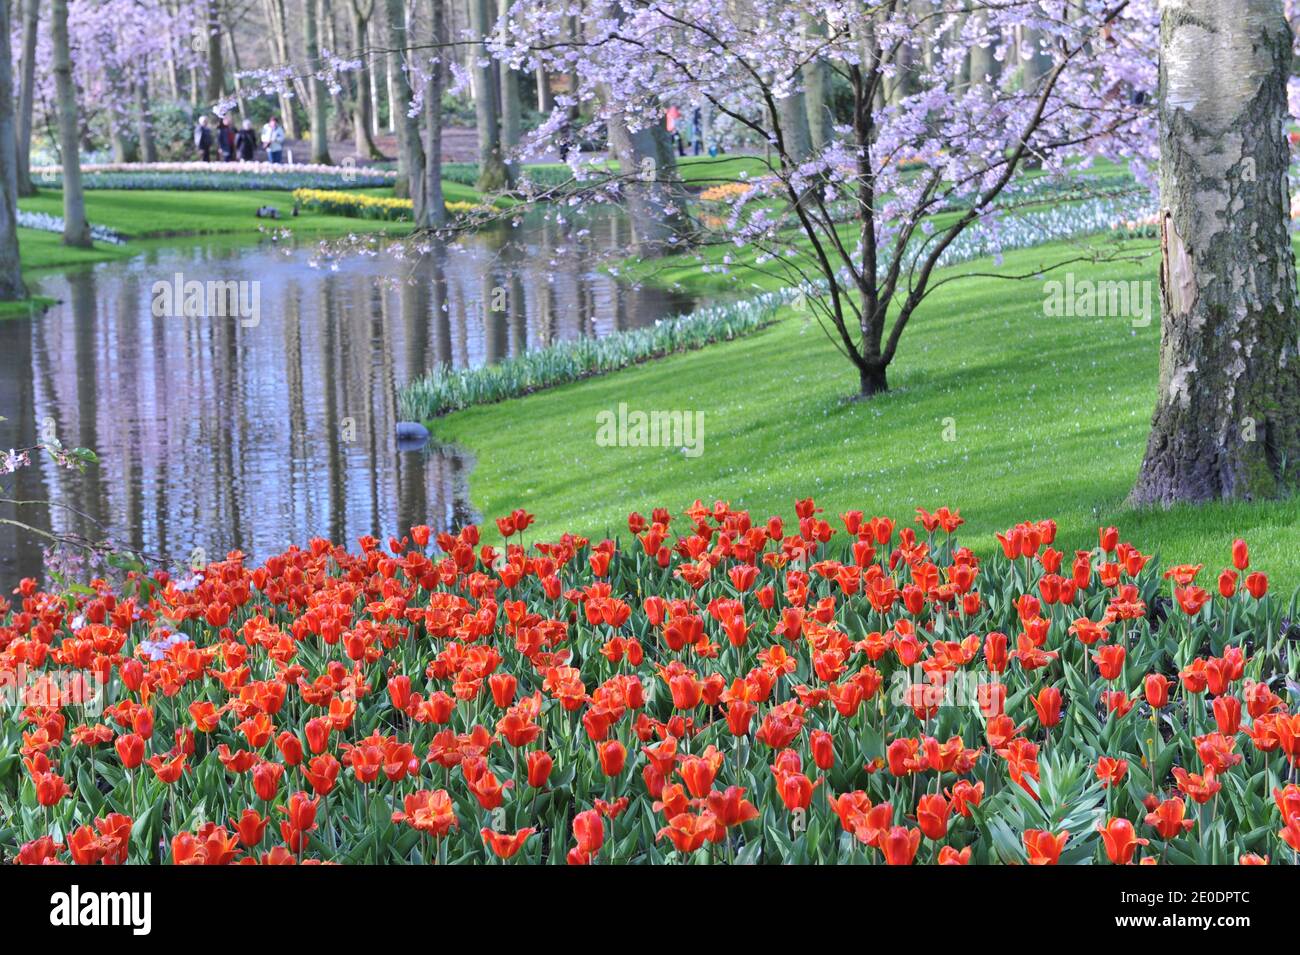 Orange-red Kaufmanniana tulips (Tulipa) Early Harvest bloom in a garden in April with a cherry blossom and a pond at background Stock Photo